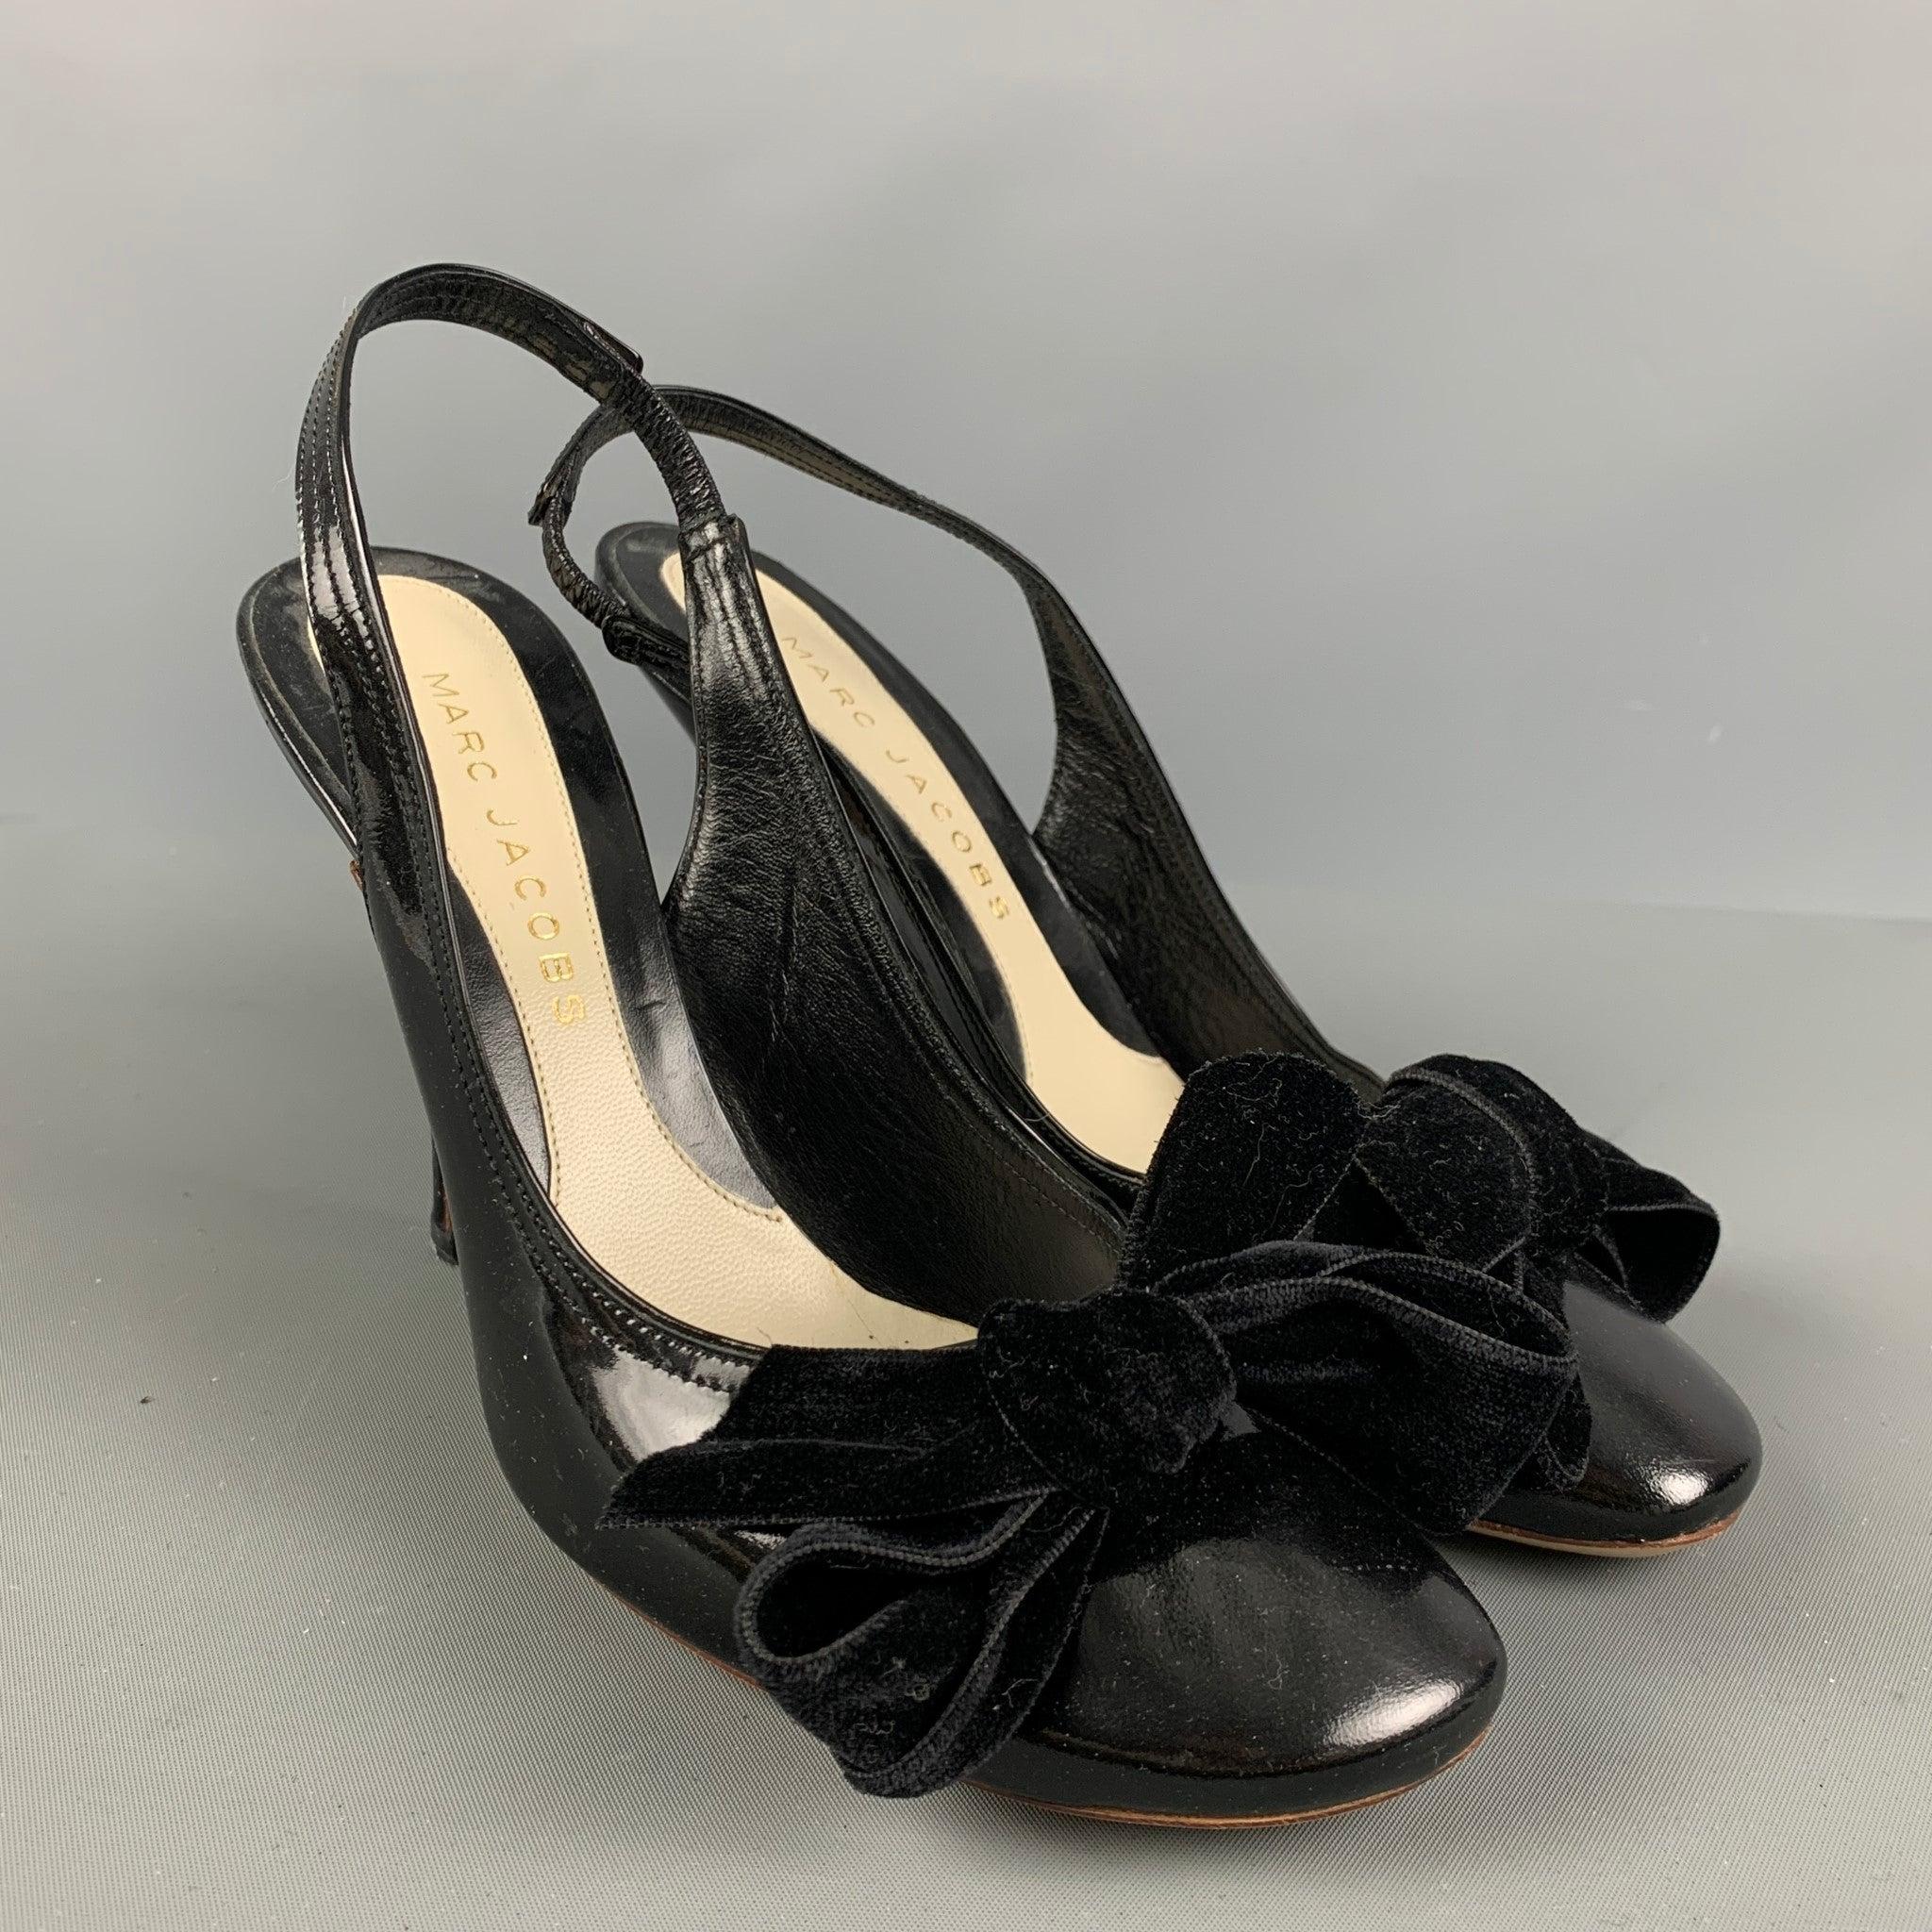 MARC JACOBS pumps comes in a black patent leather material featuring a slingback style, velvet trim bow detail, and a stiletto heel. Made in Italy.Very Good Pre-Owned Condition. As Is. 

Marked:   36 1/2 

Measurements: 
  Heel: 4 inches 
  
  
